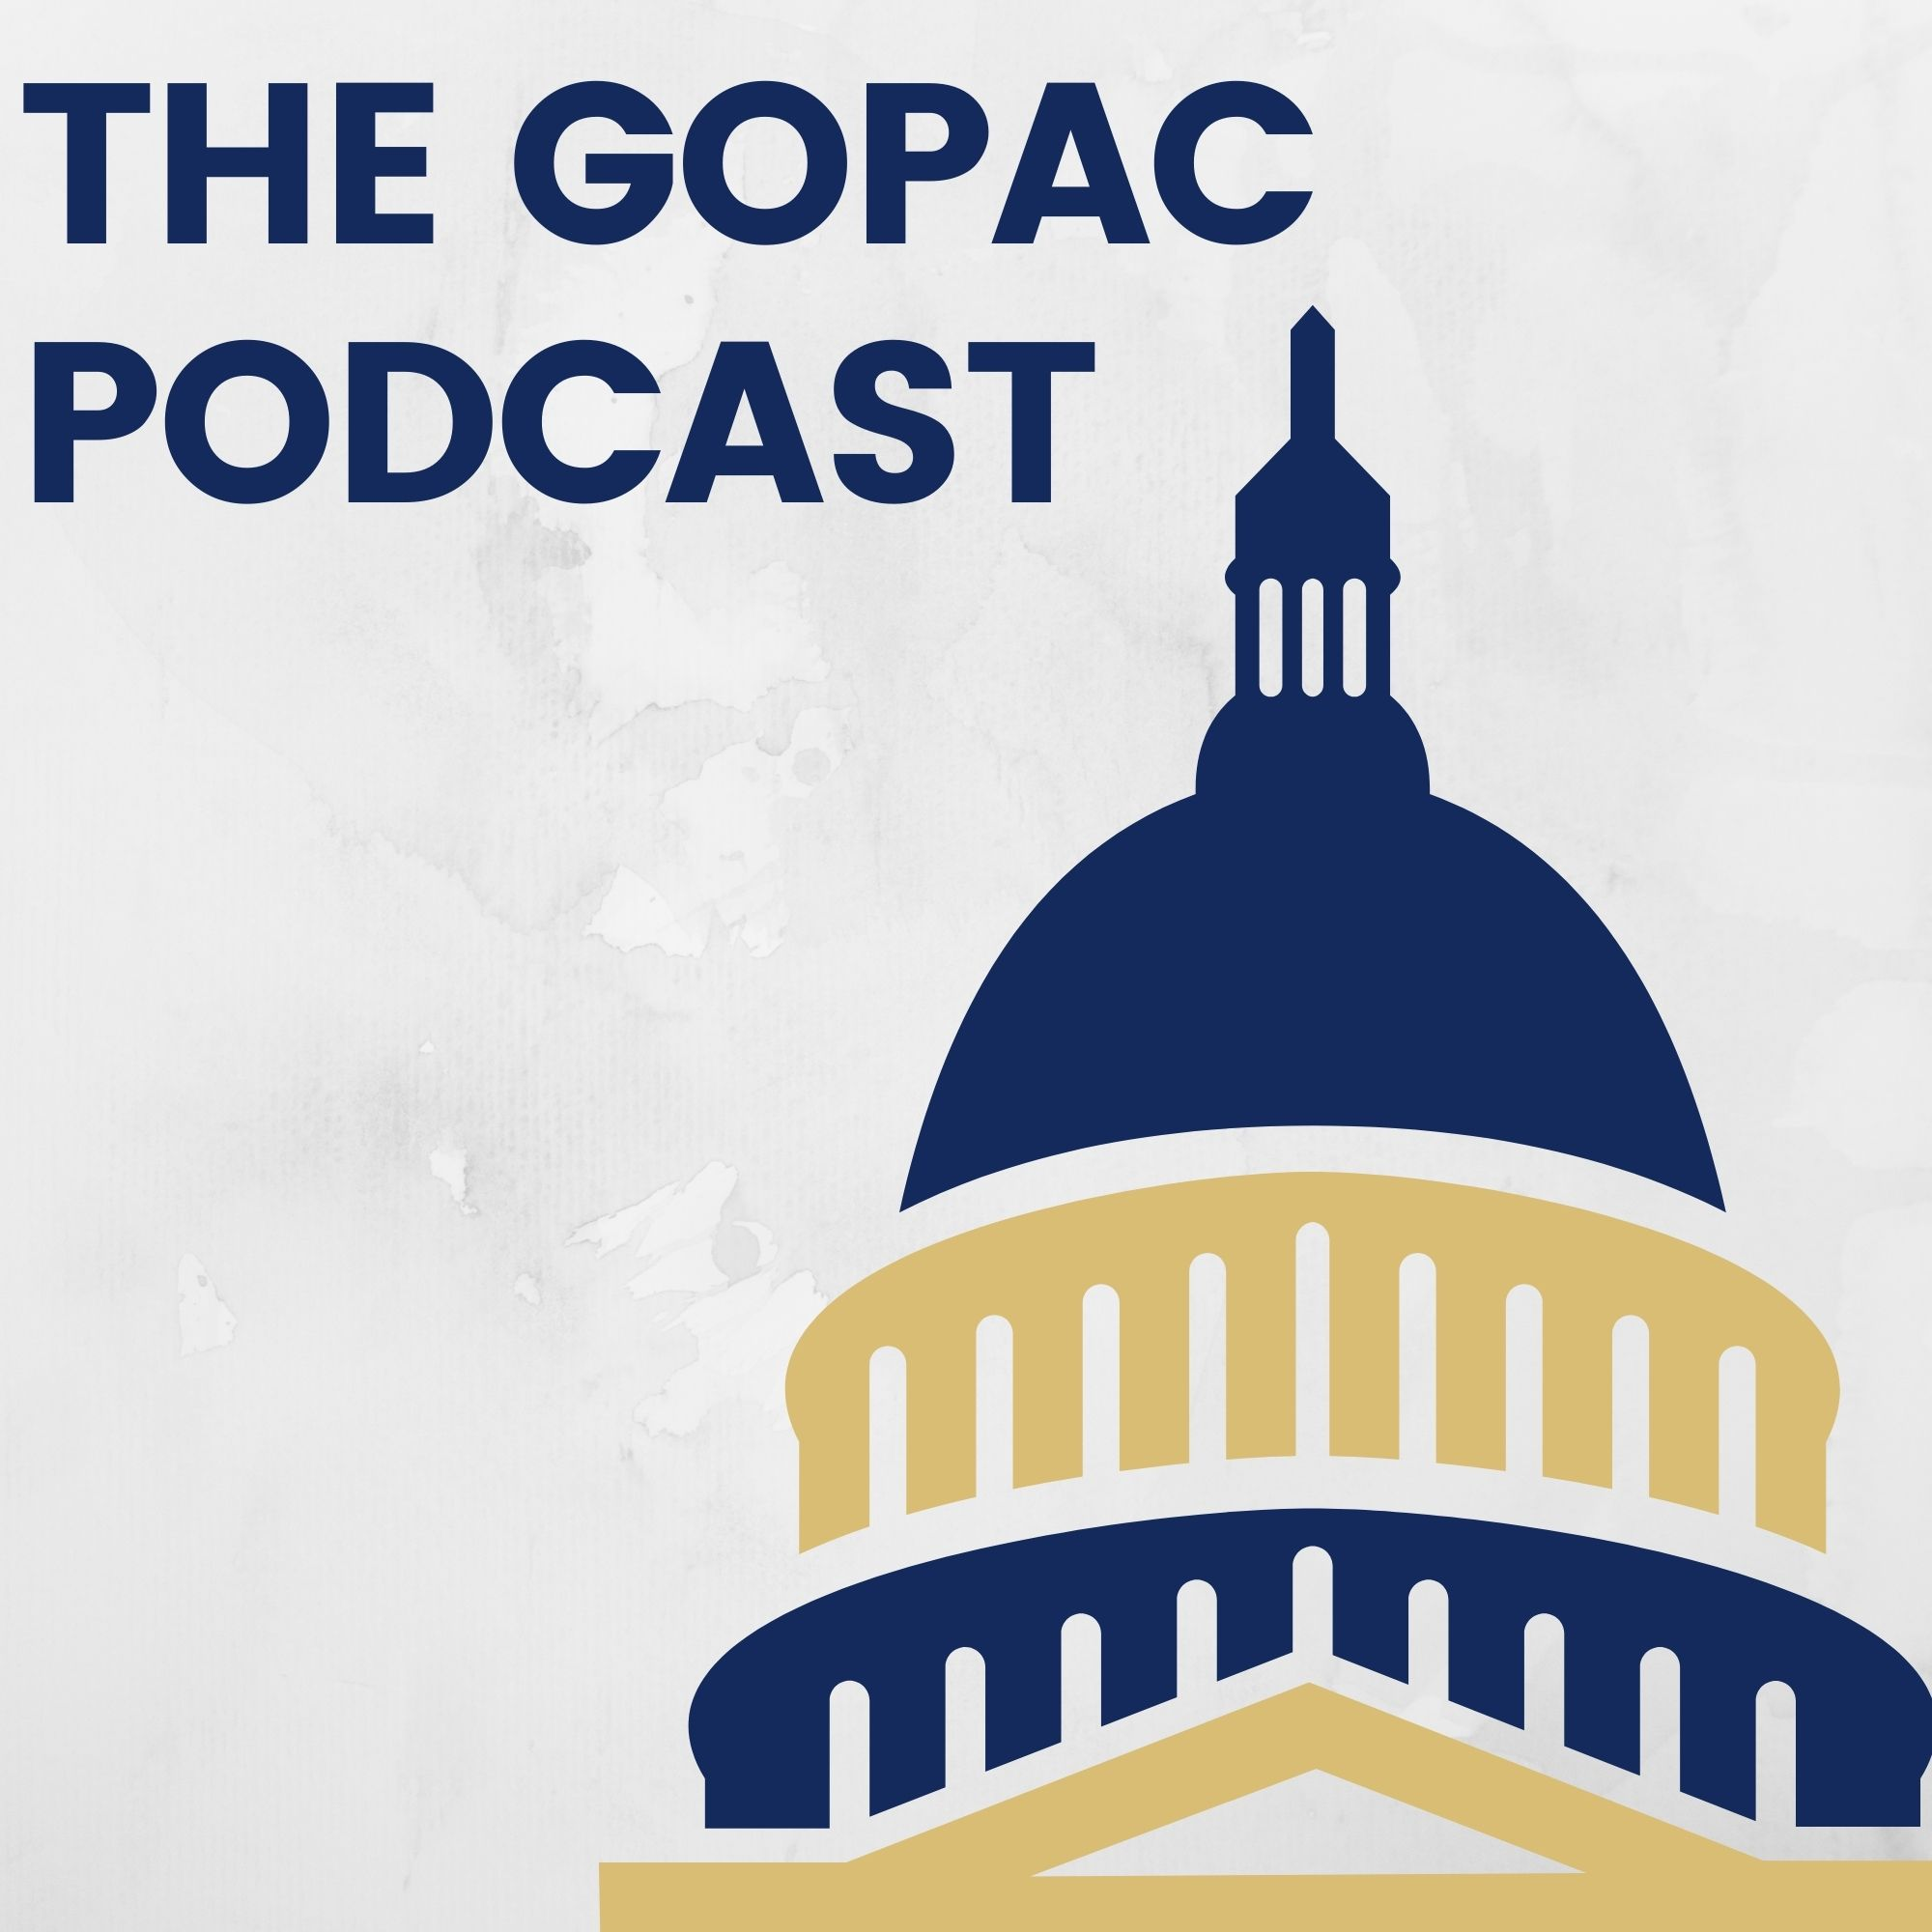 Pollster Adam Geller dives into the details of a GOPAC sanctioned national survey of Republican voters and President Donald Trump